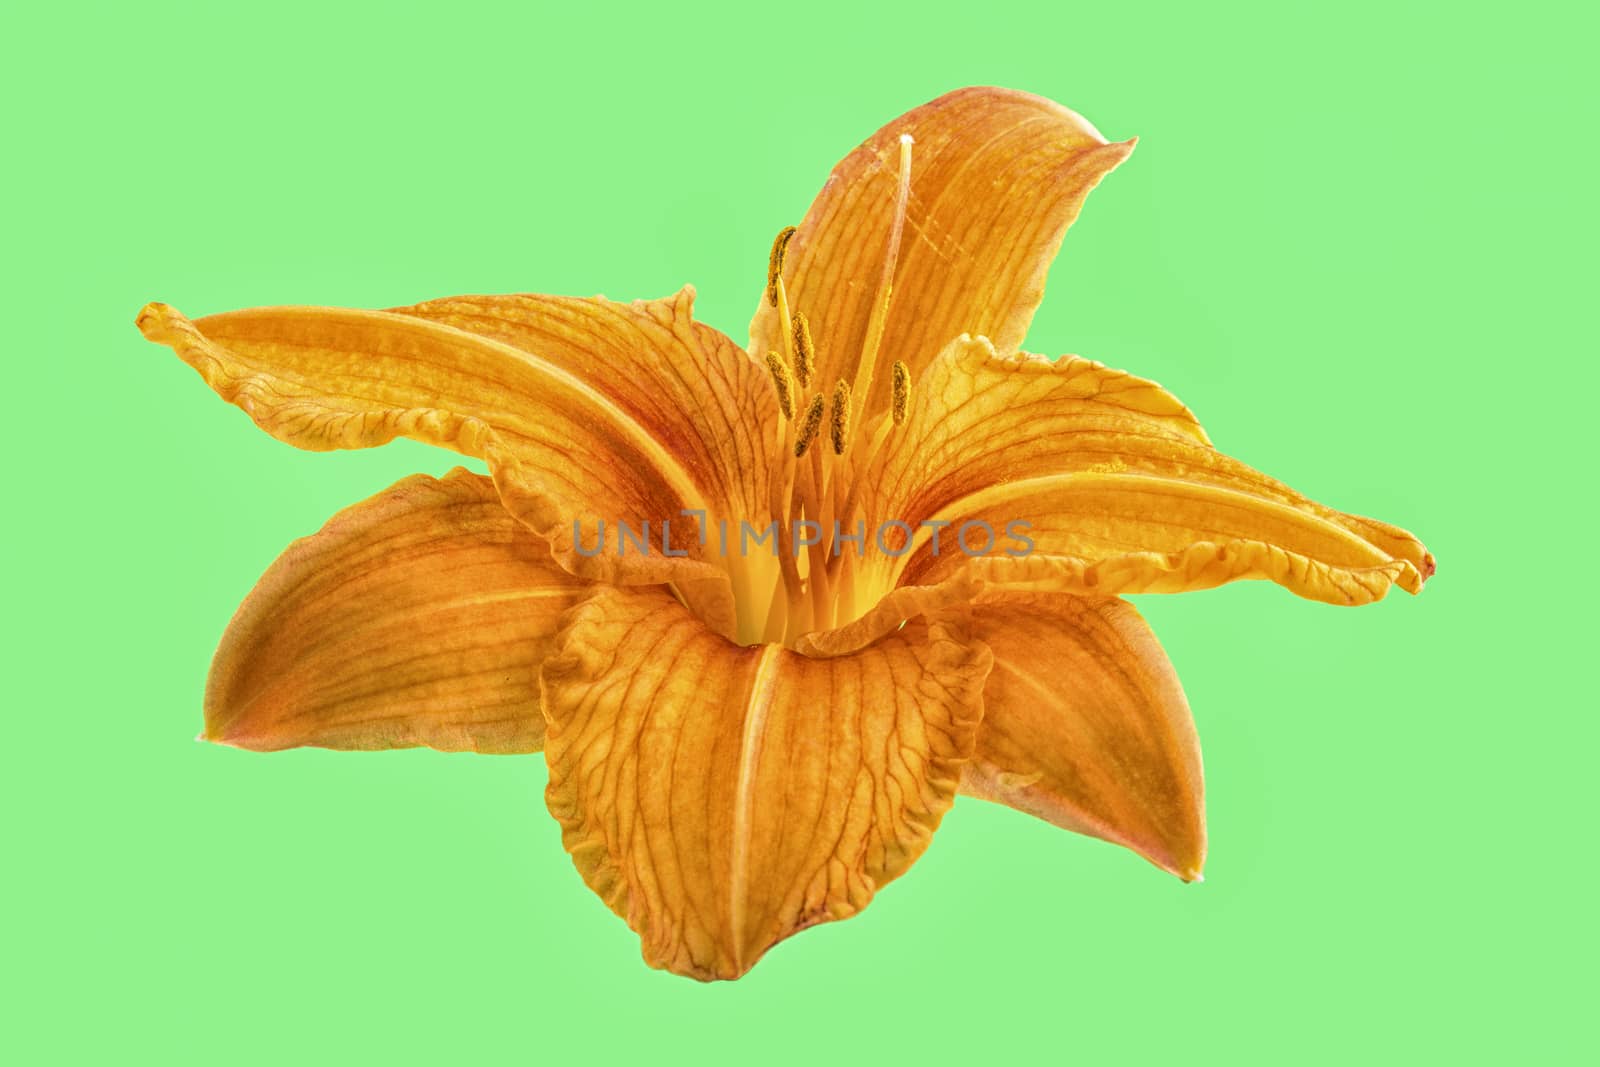 Orange lily flower isolated on green background